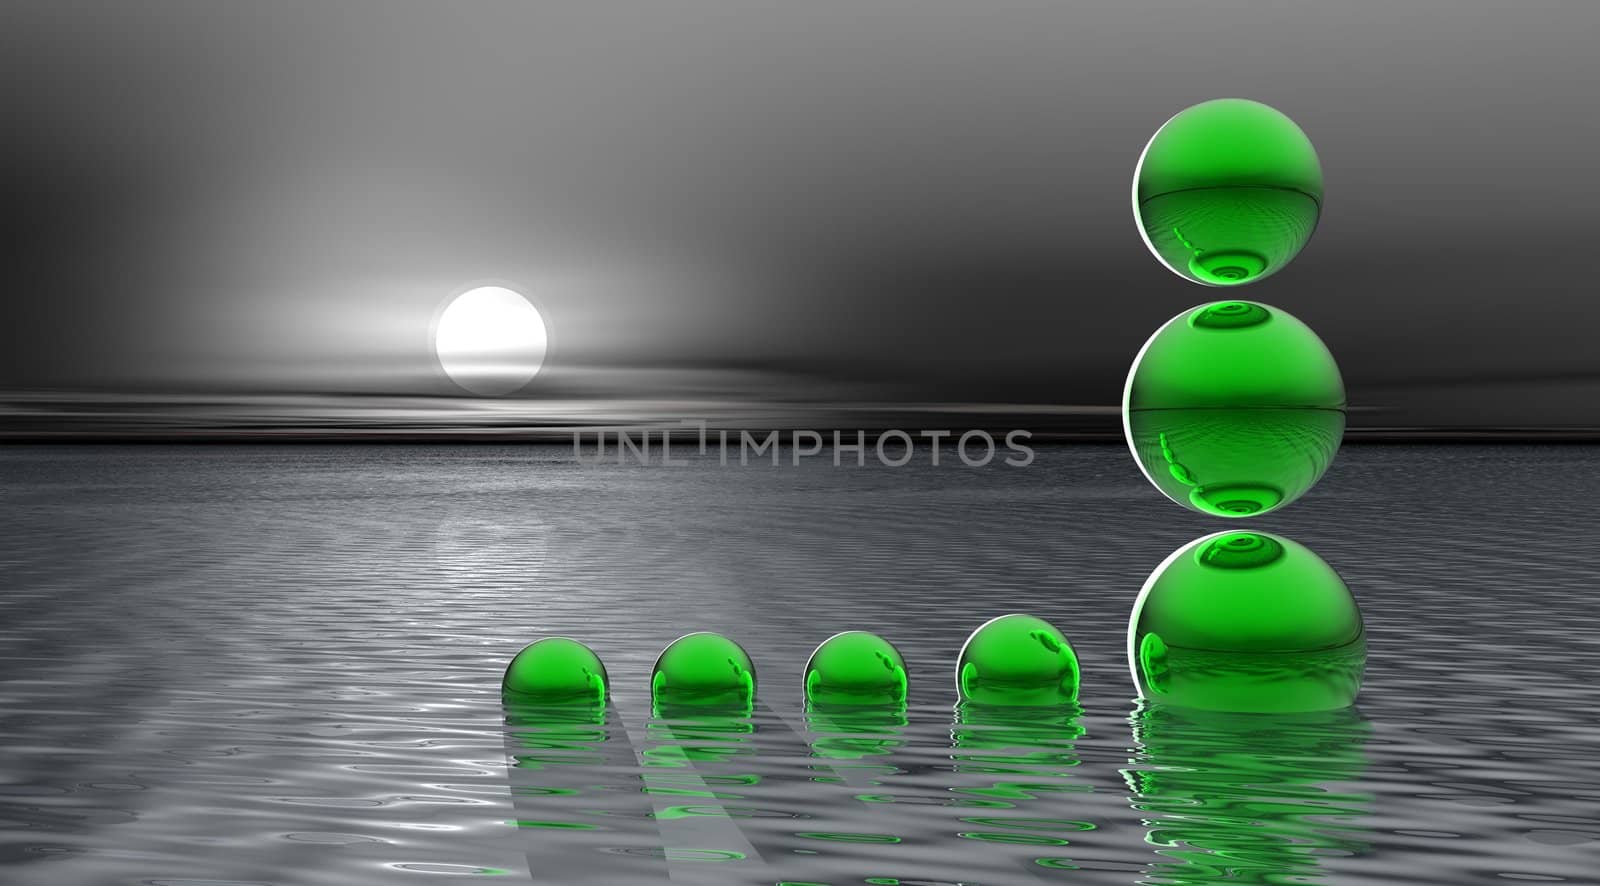 Black and white landscape with seven balls greengre